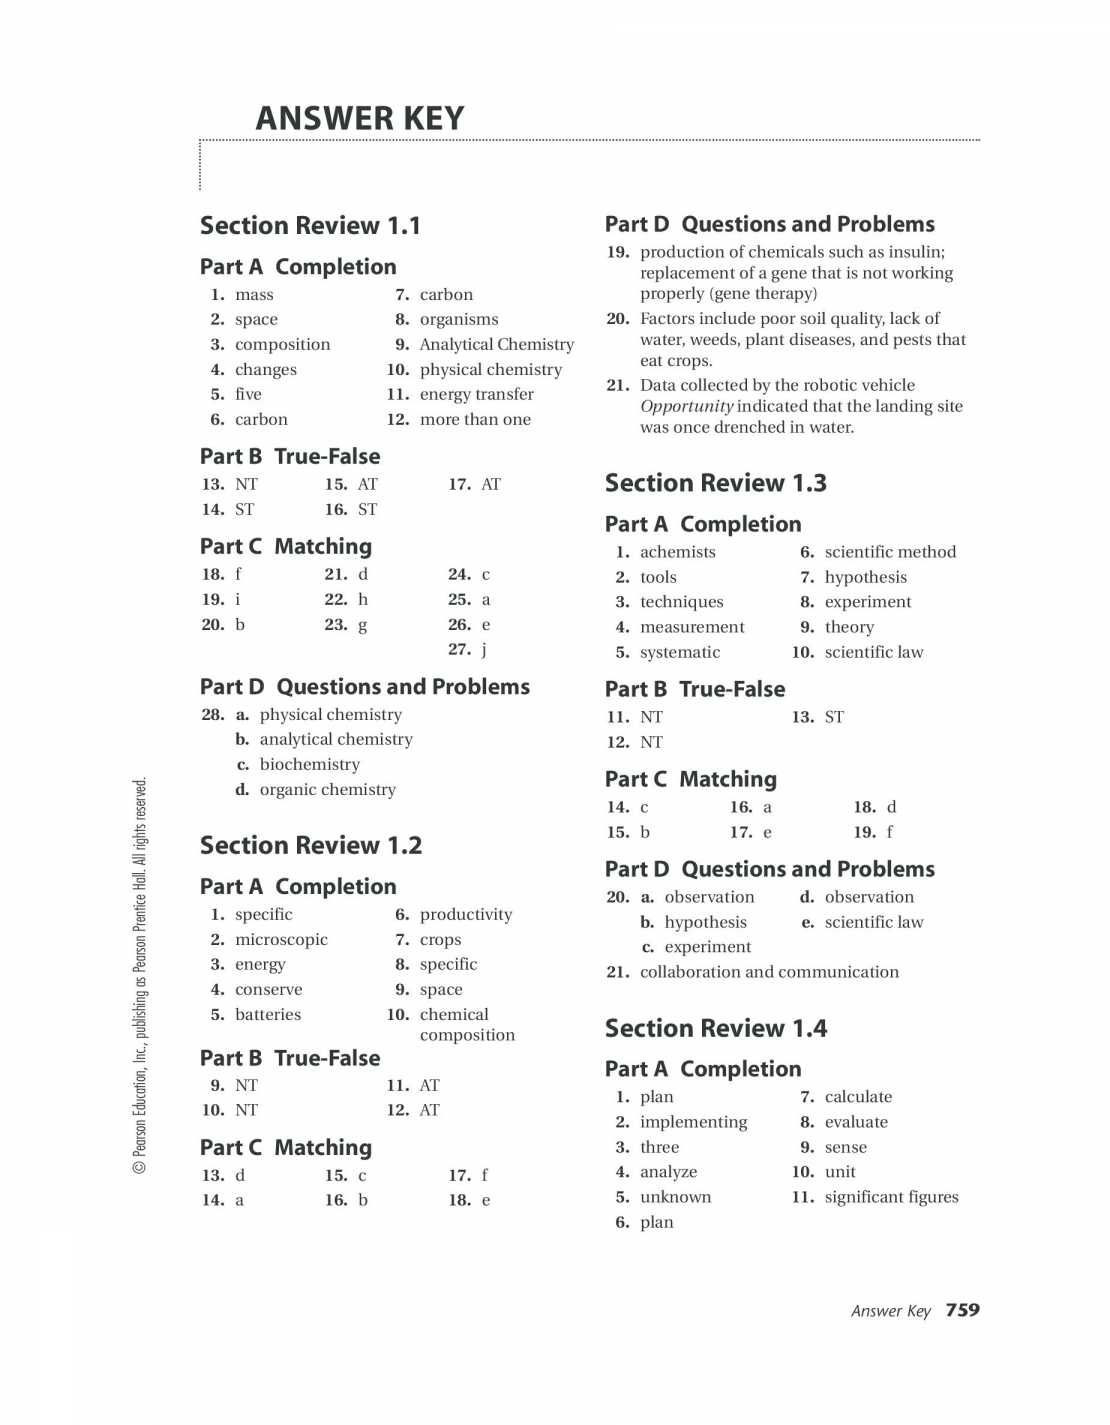 Organic Compounds Worksheet Answers